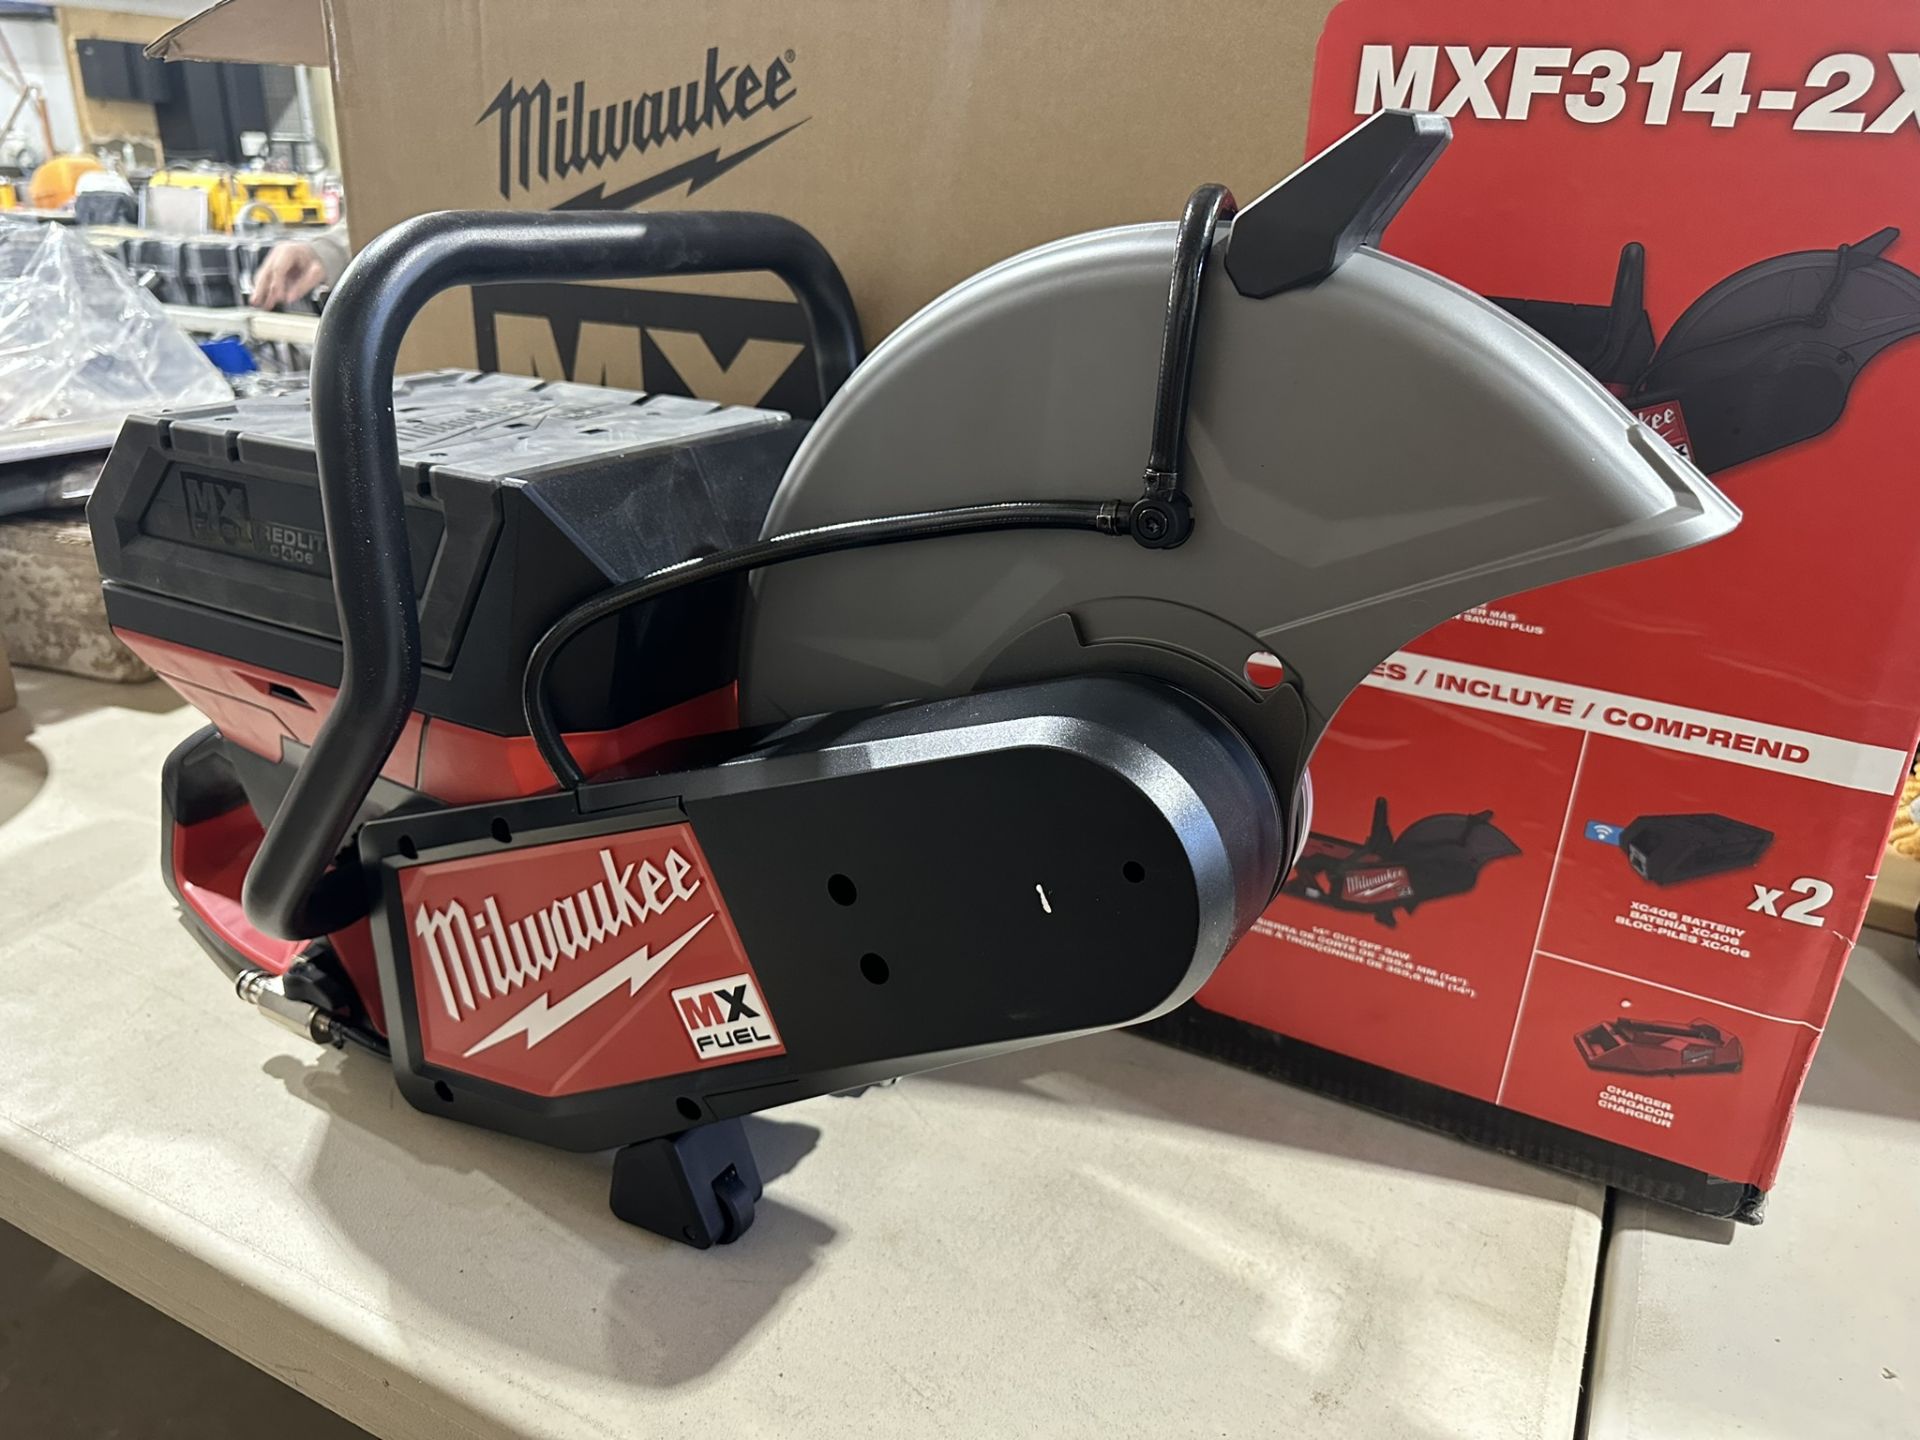 MILWAUKEE MXF314-2XC CORDLESS 14" DEMOLITION SAW W/ 2 XC406 BATTERIES AND CHARGER (NEW IN BOX) - Image 6 of 8